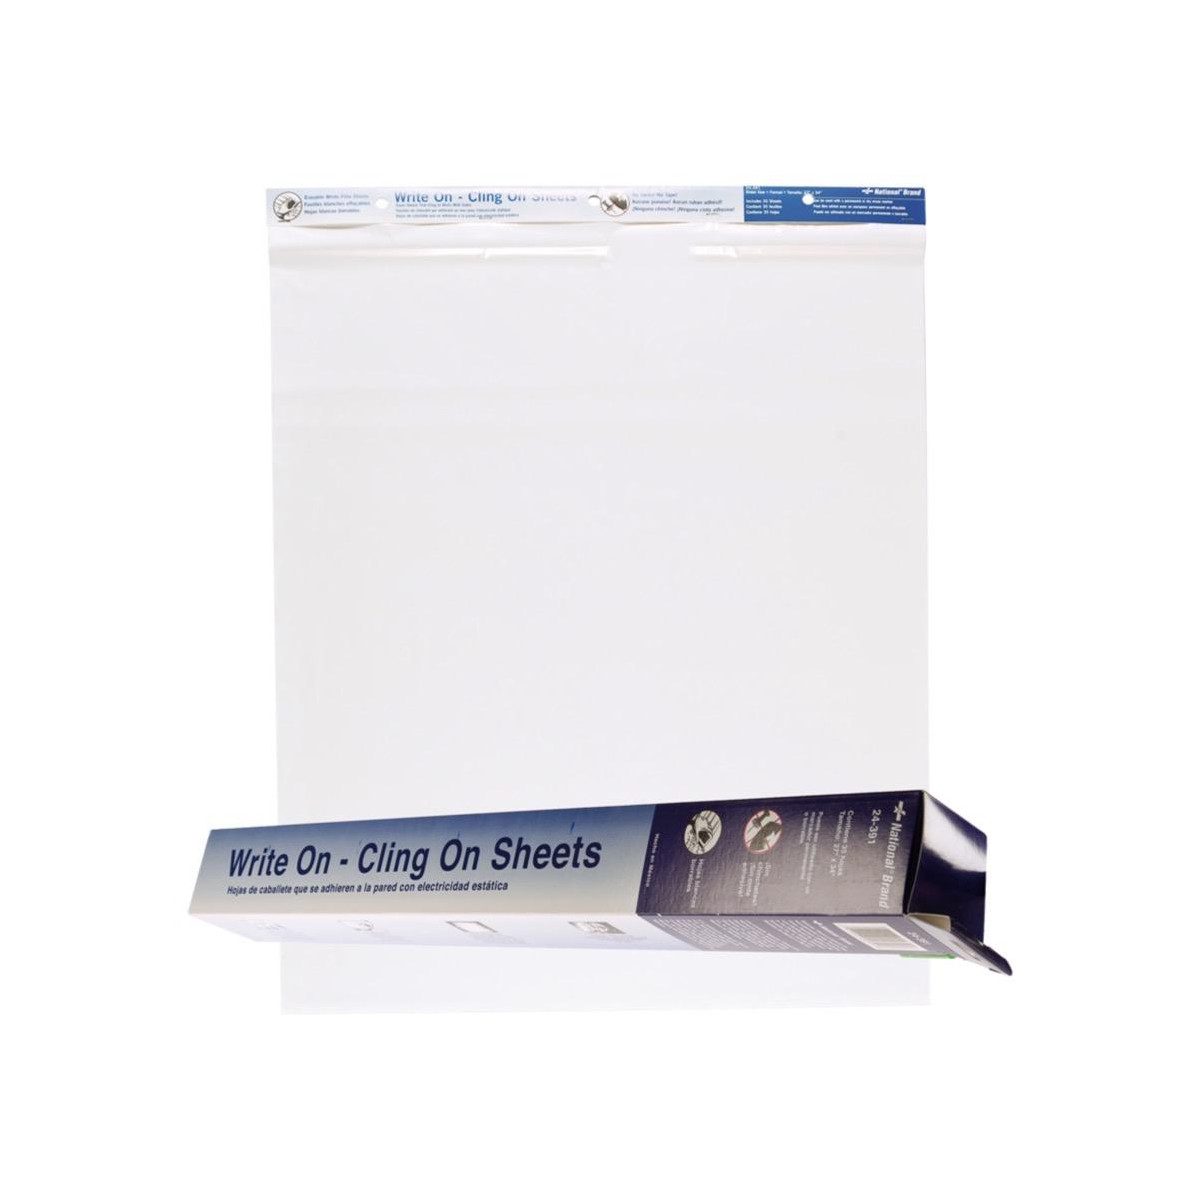 Post-it Super Sticky Easel Pad, 25 x 30 Inches, 30 Sheets/Pad, 2